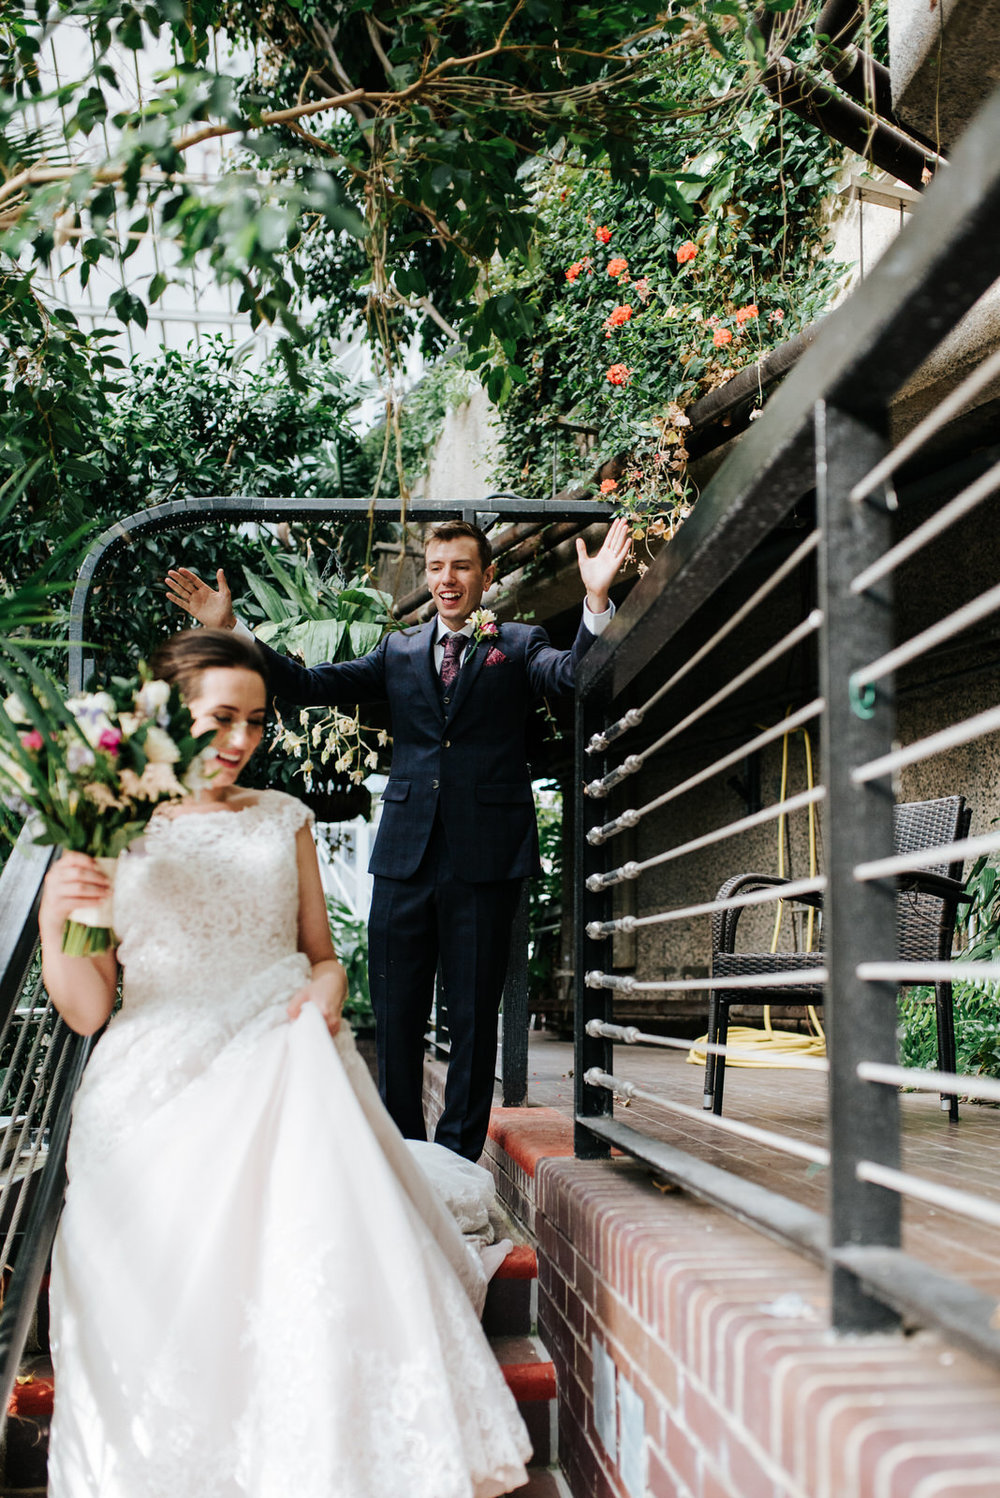 Bride walks down stairs in Barbican Centre as groom cheers from 